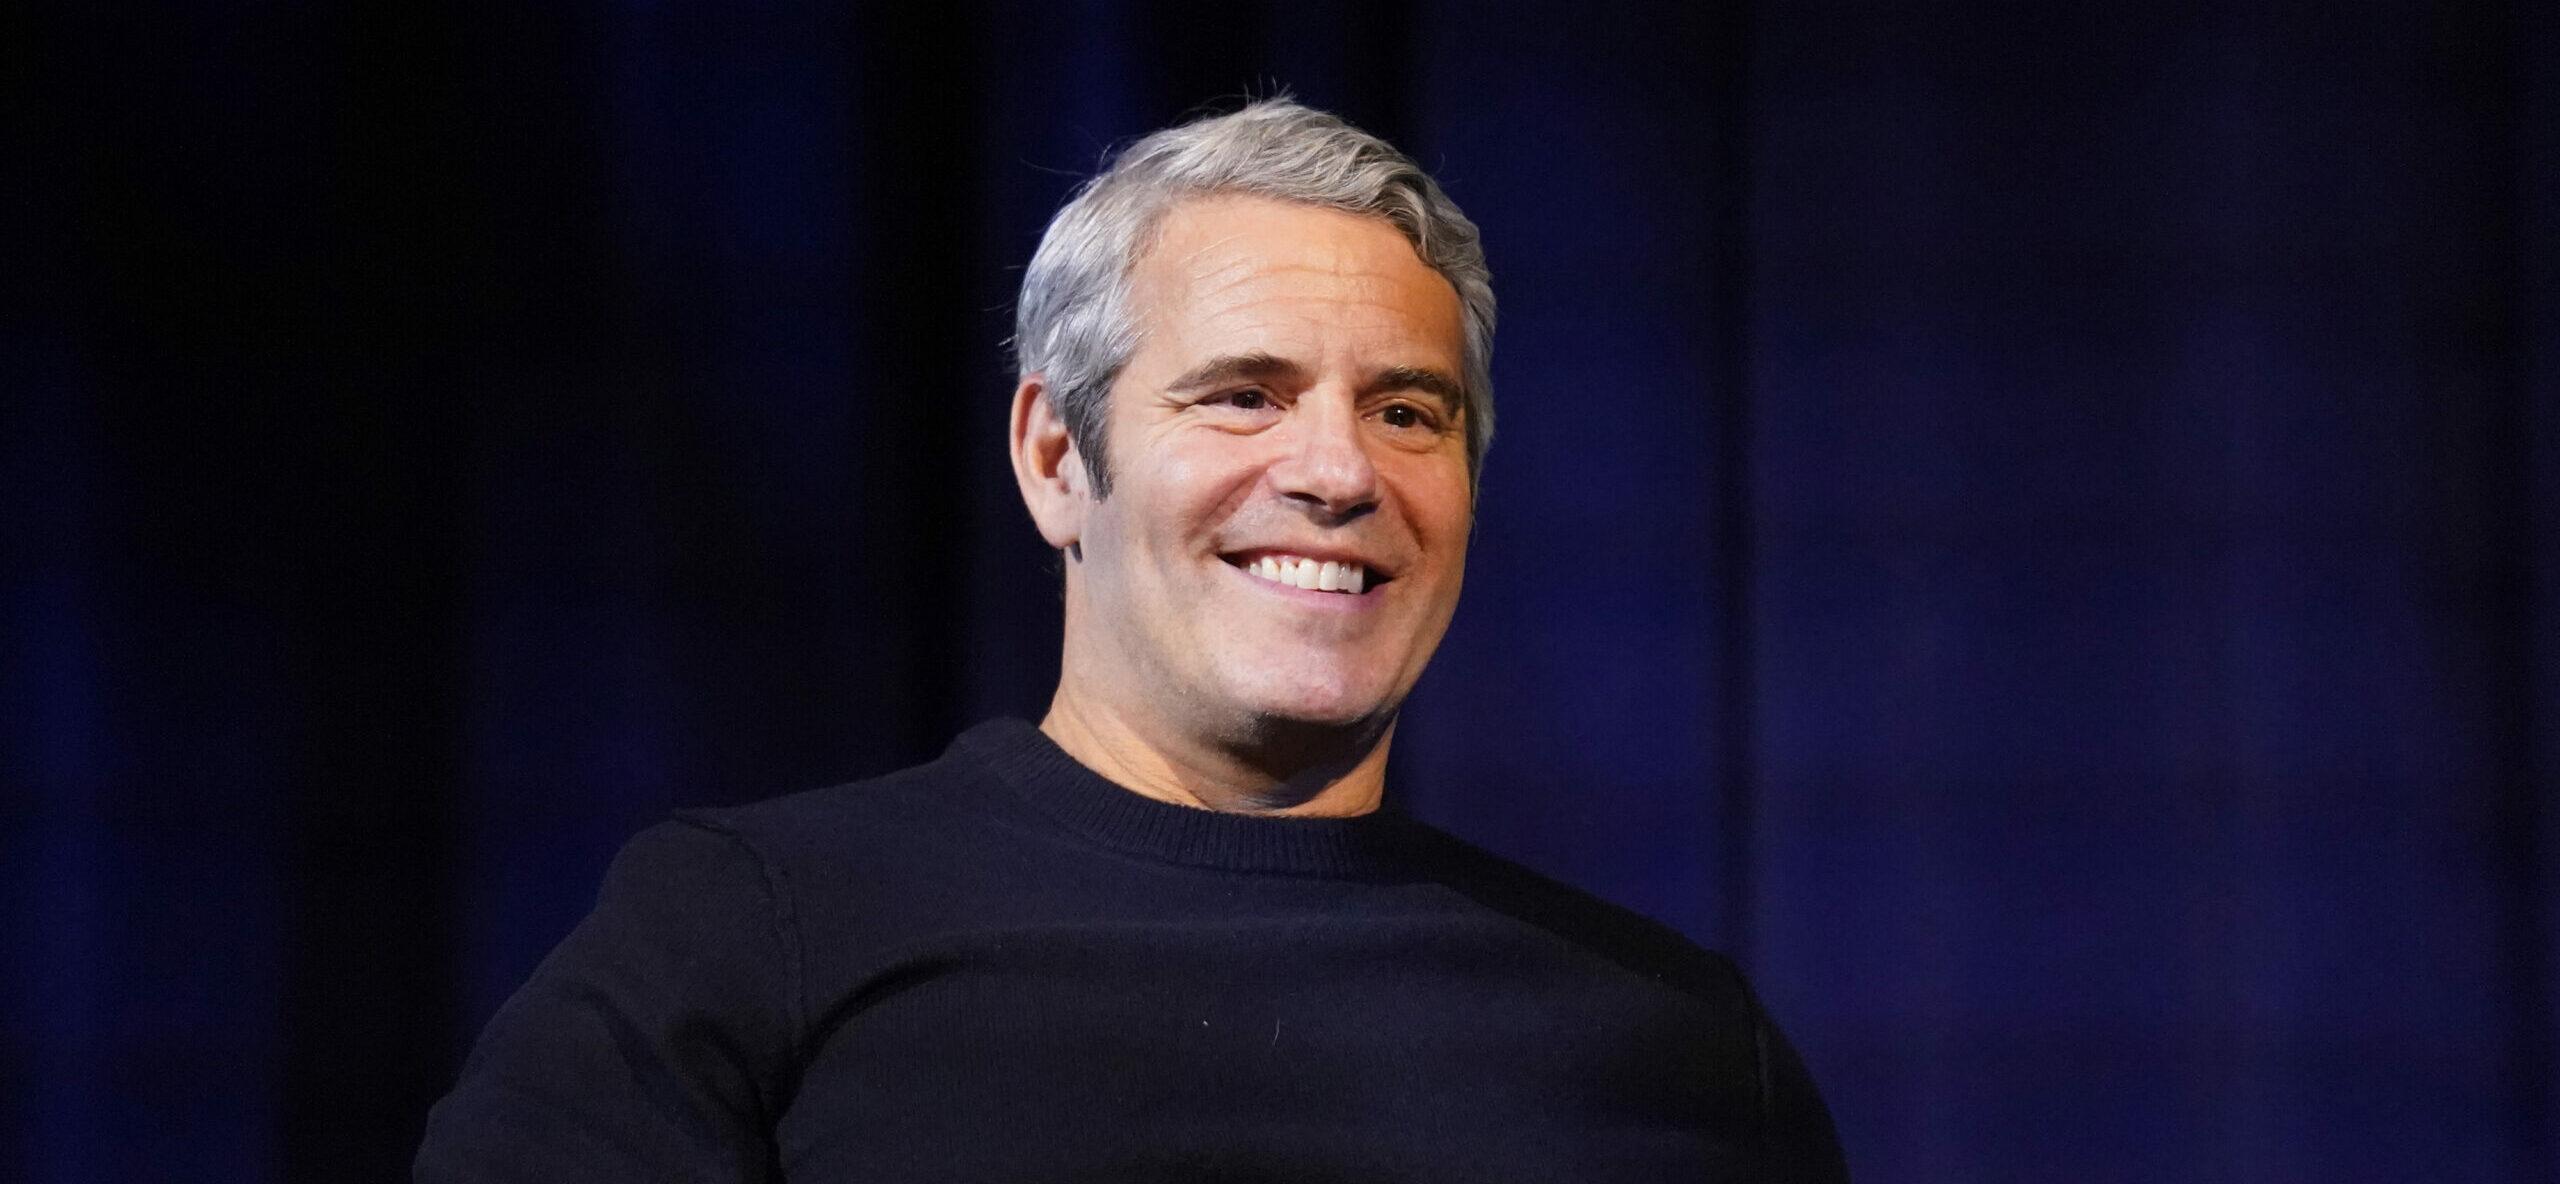 Talk Show Host Andy Cohen Returns to His High School To Plug New Book